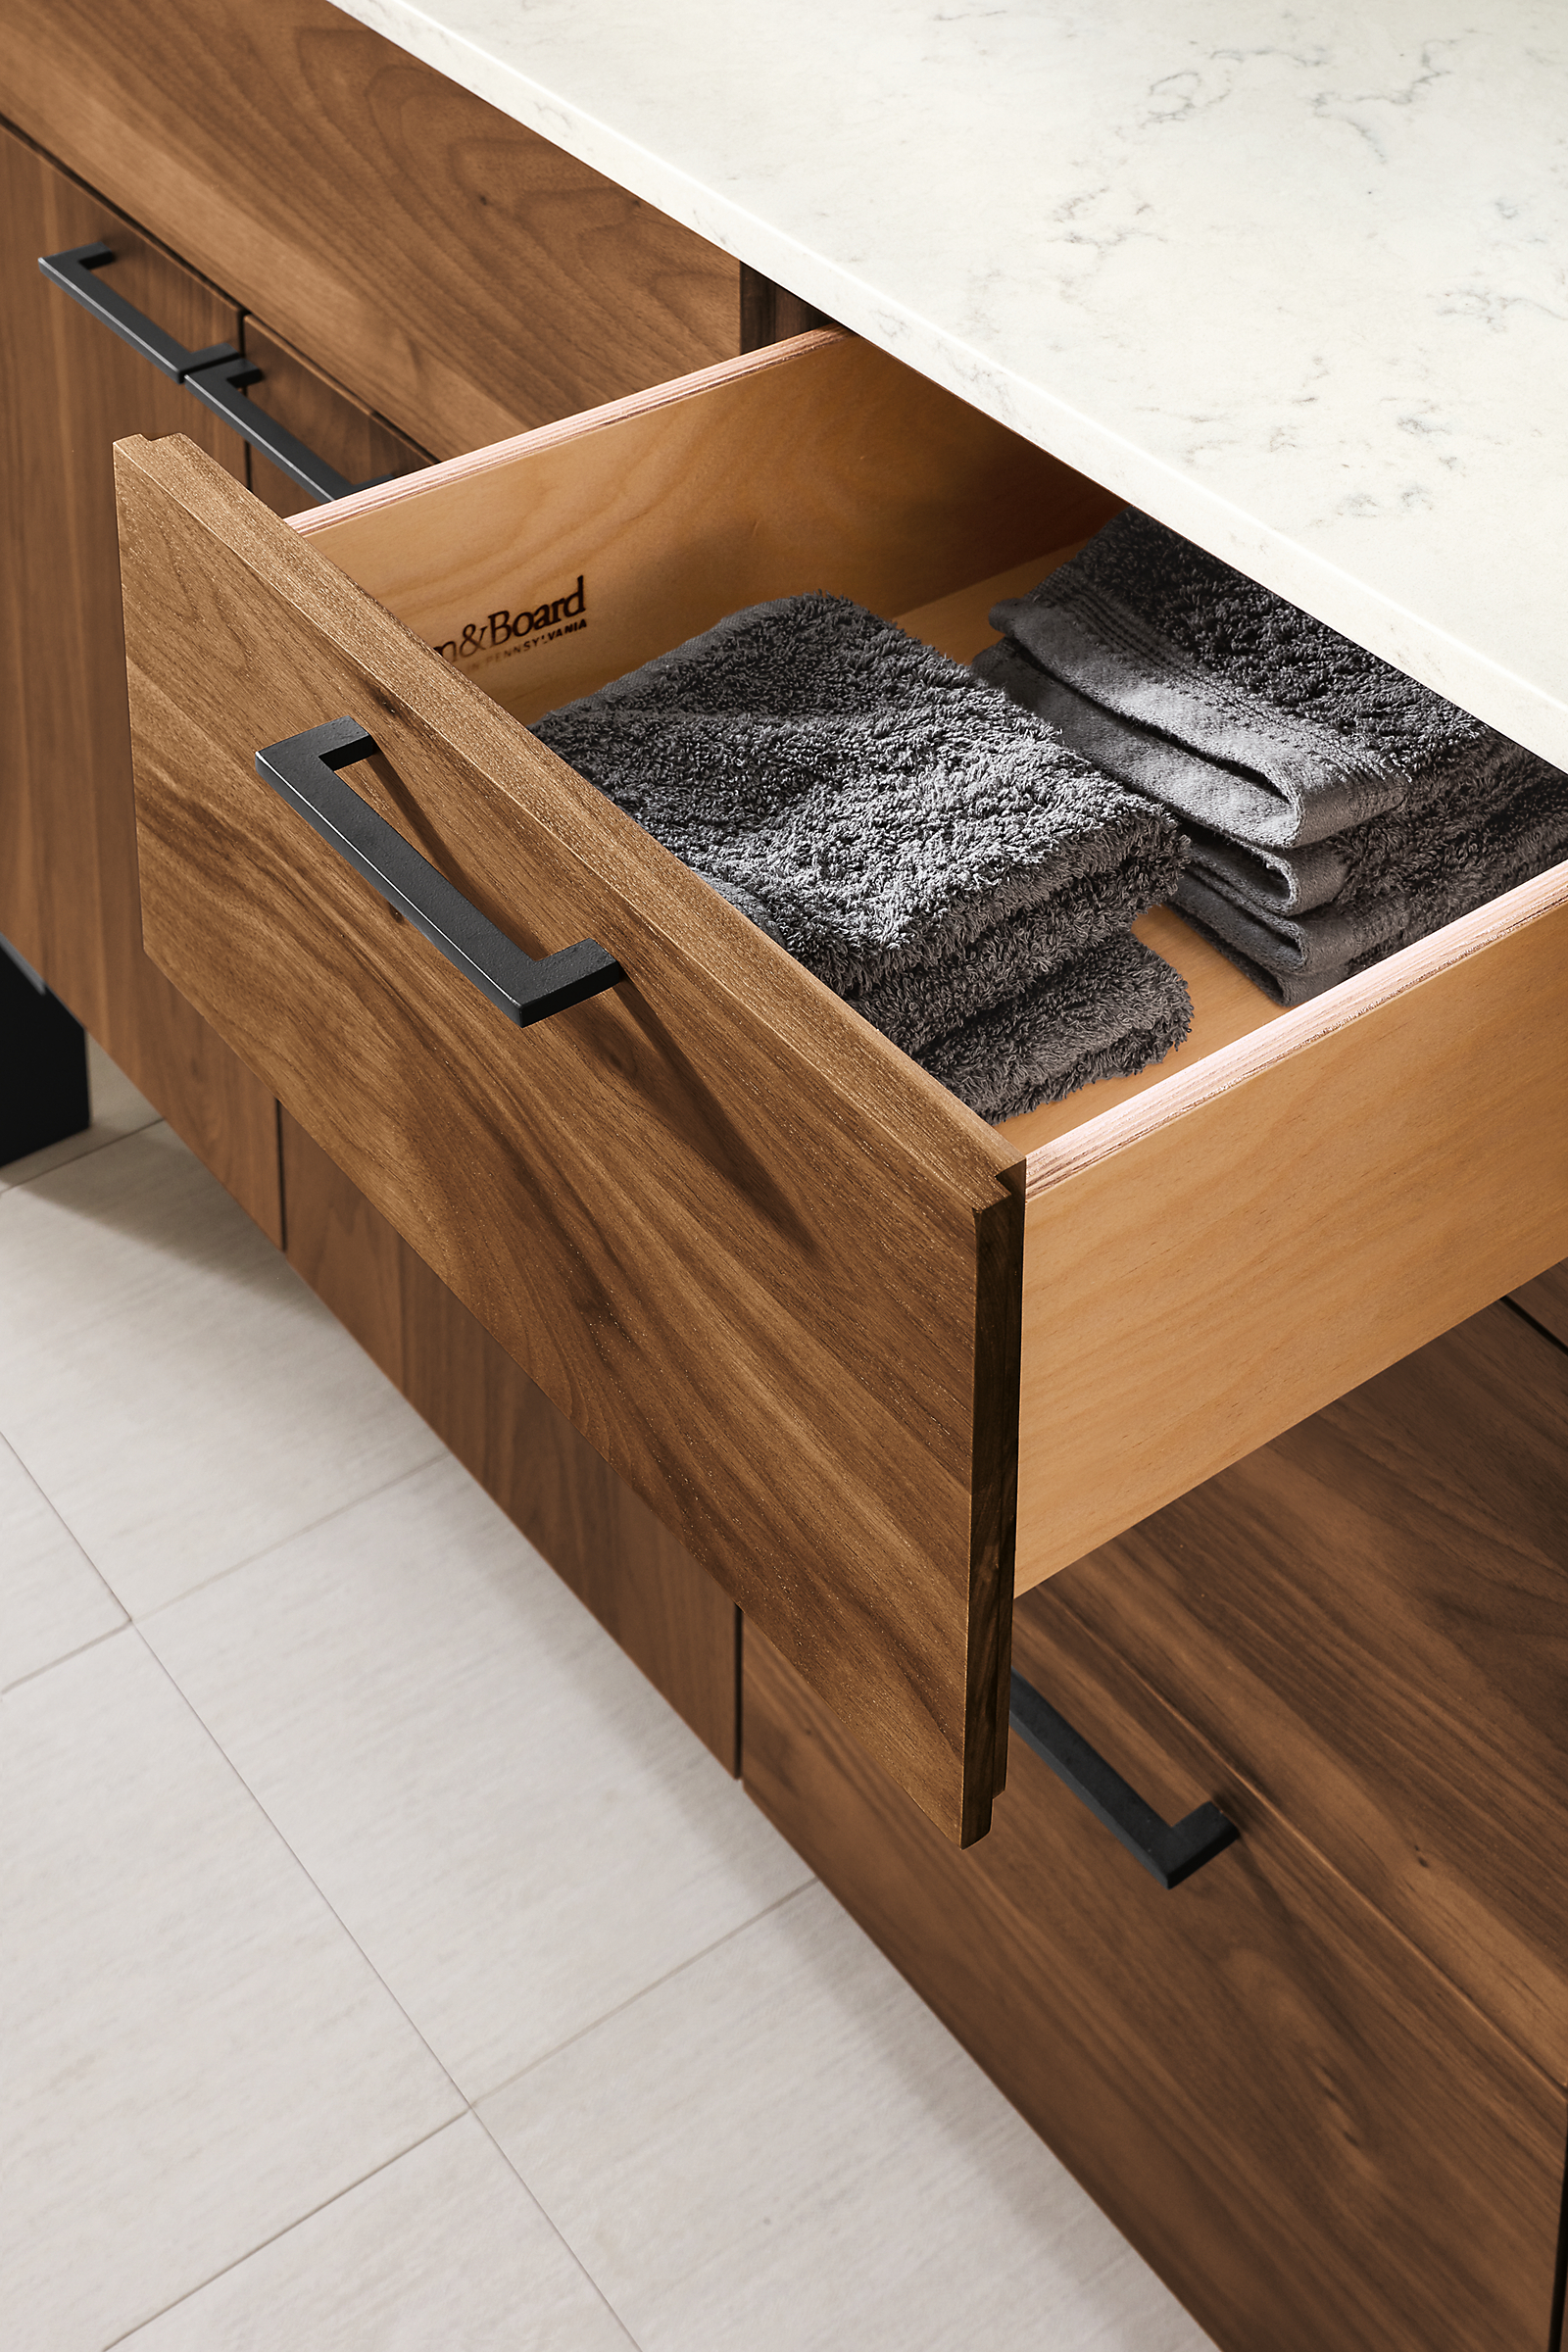 Detail of Kenwood vanity with open drawer.